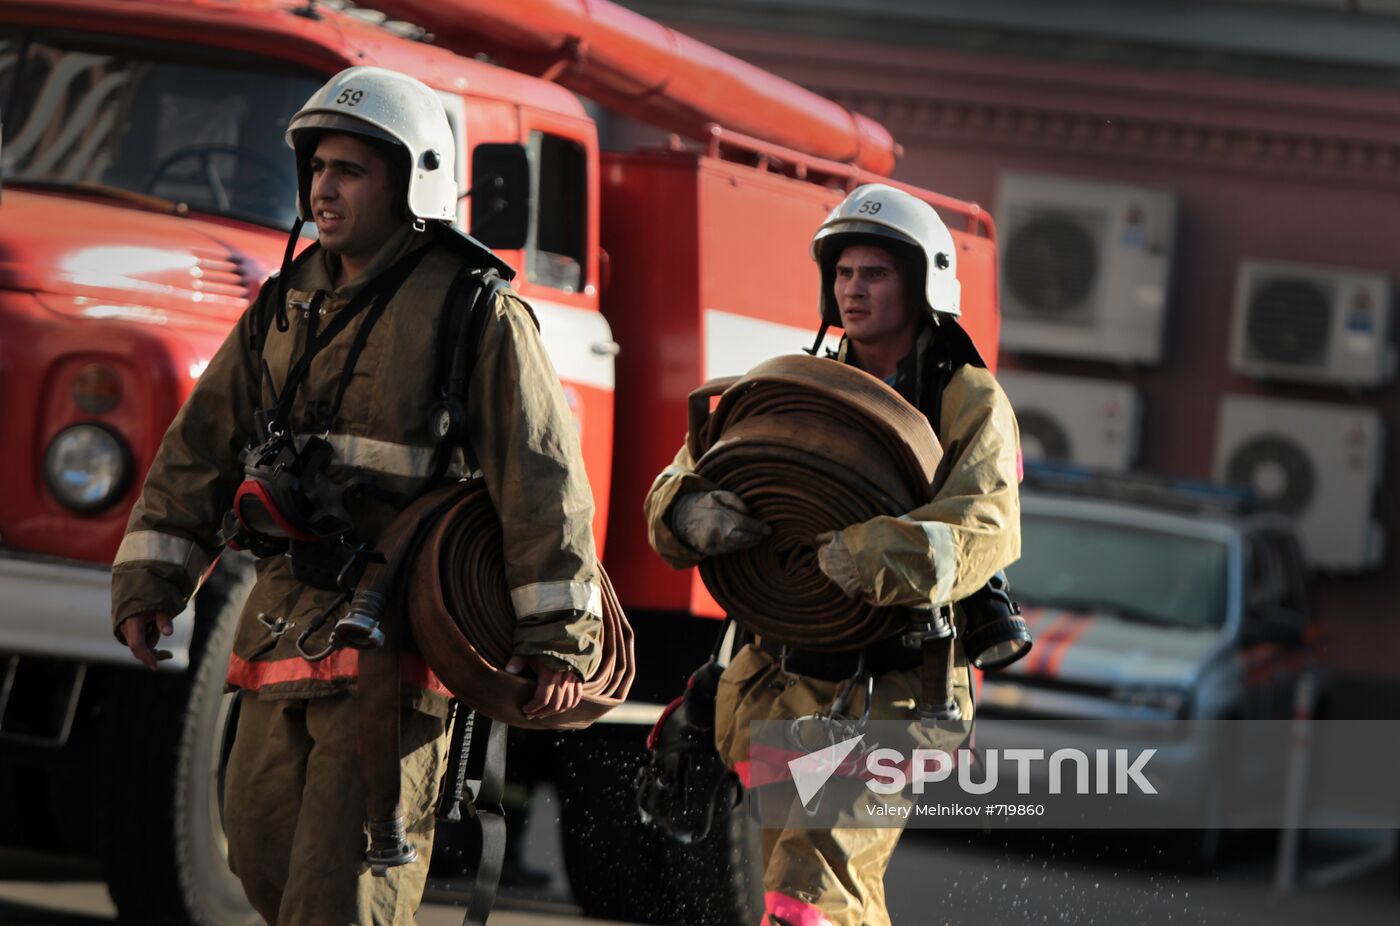 Extinguishing fire in central Moscow